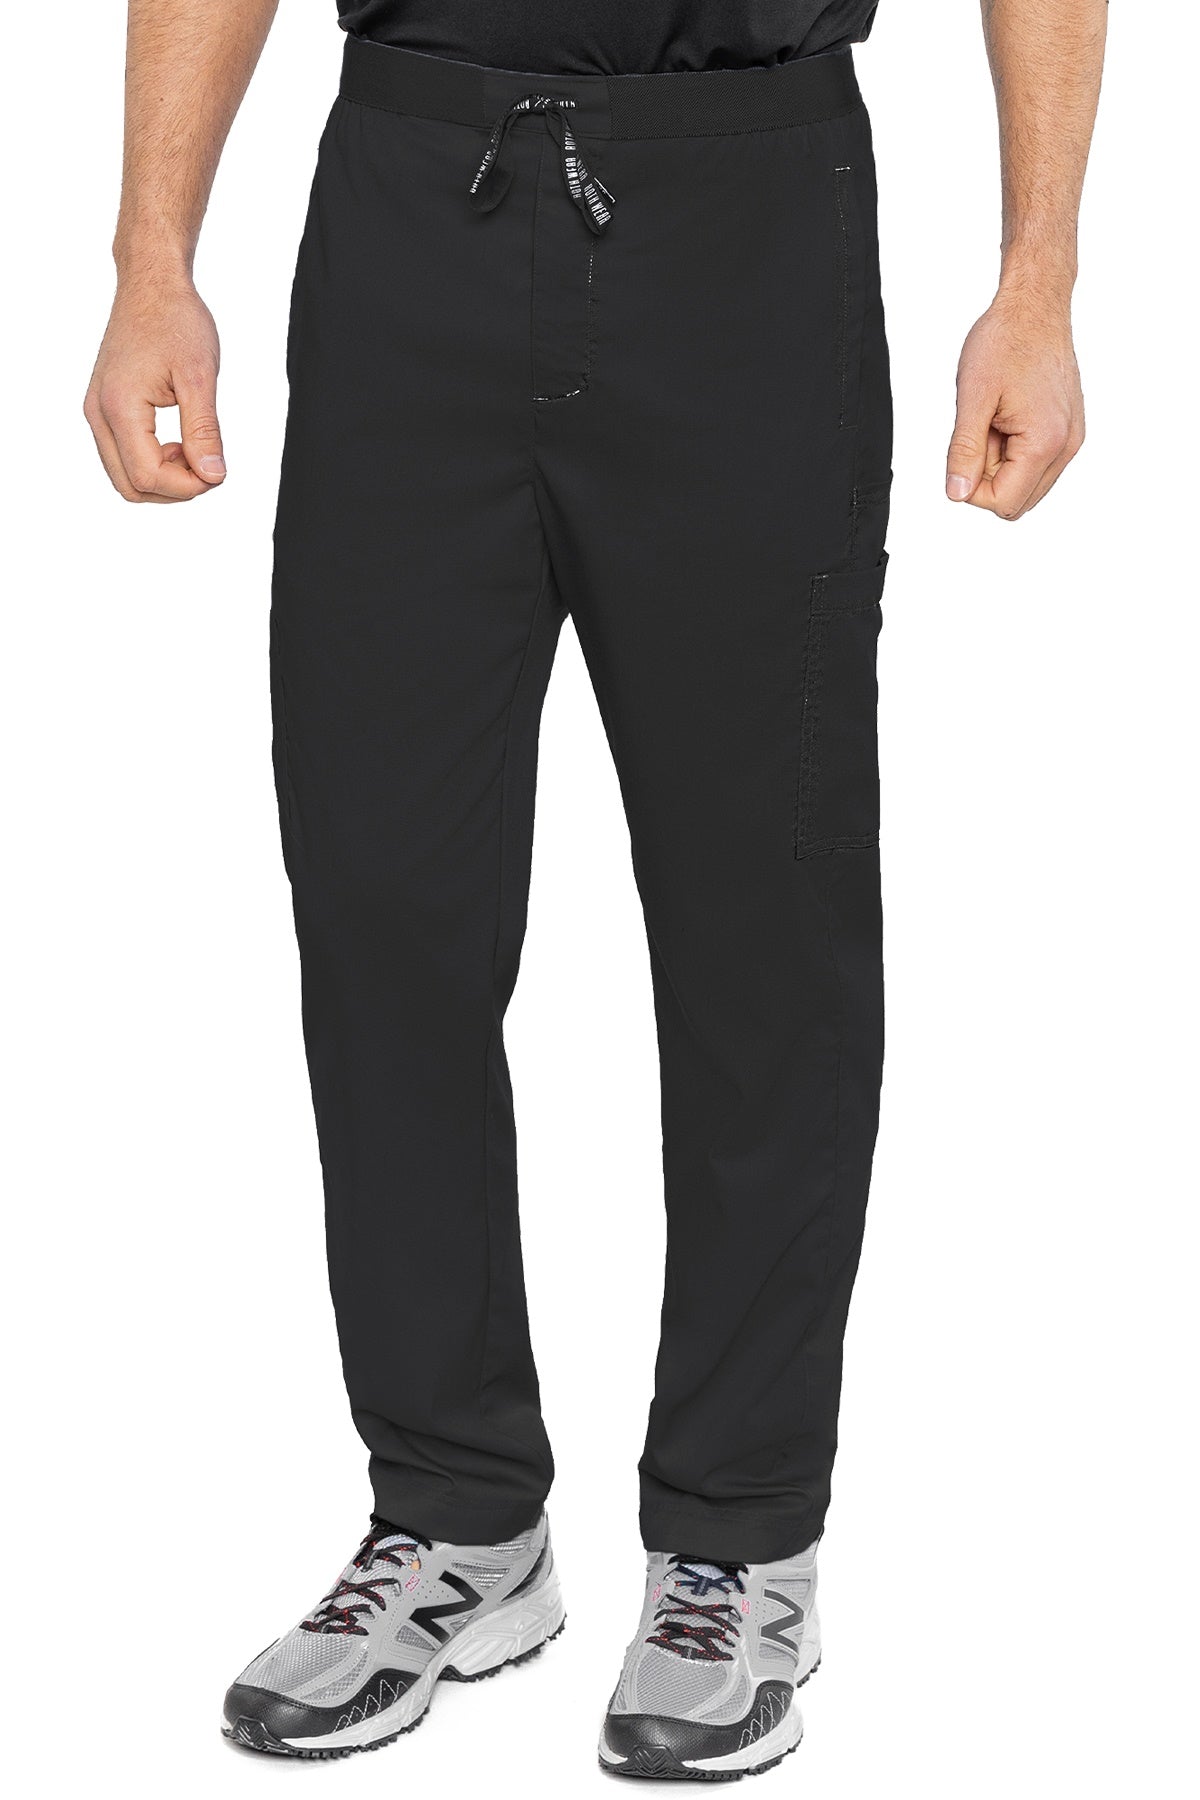 Med Couture Mens Scrub Pants RothWear Hutton Straight Leg in Black at Parker's Clothing and Shoes.